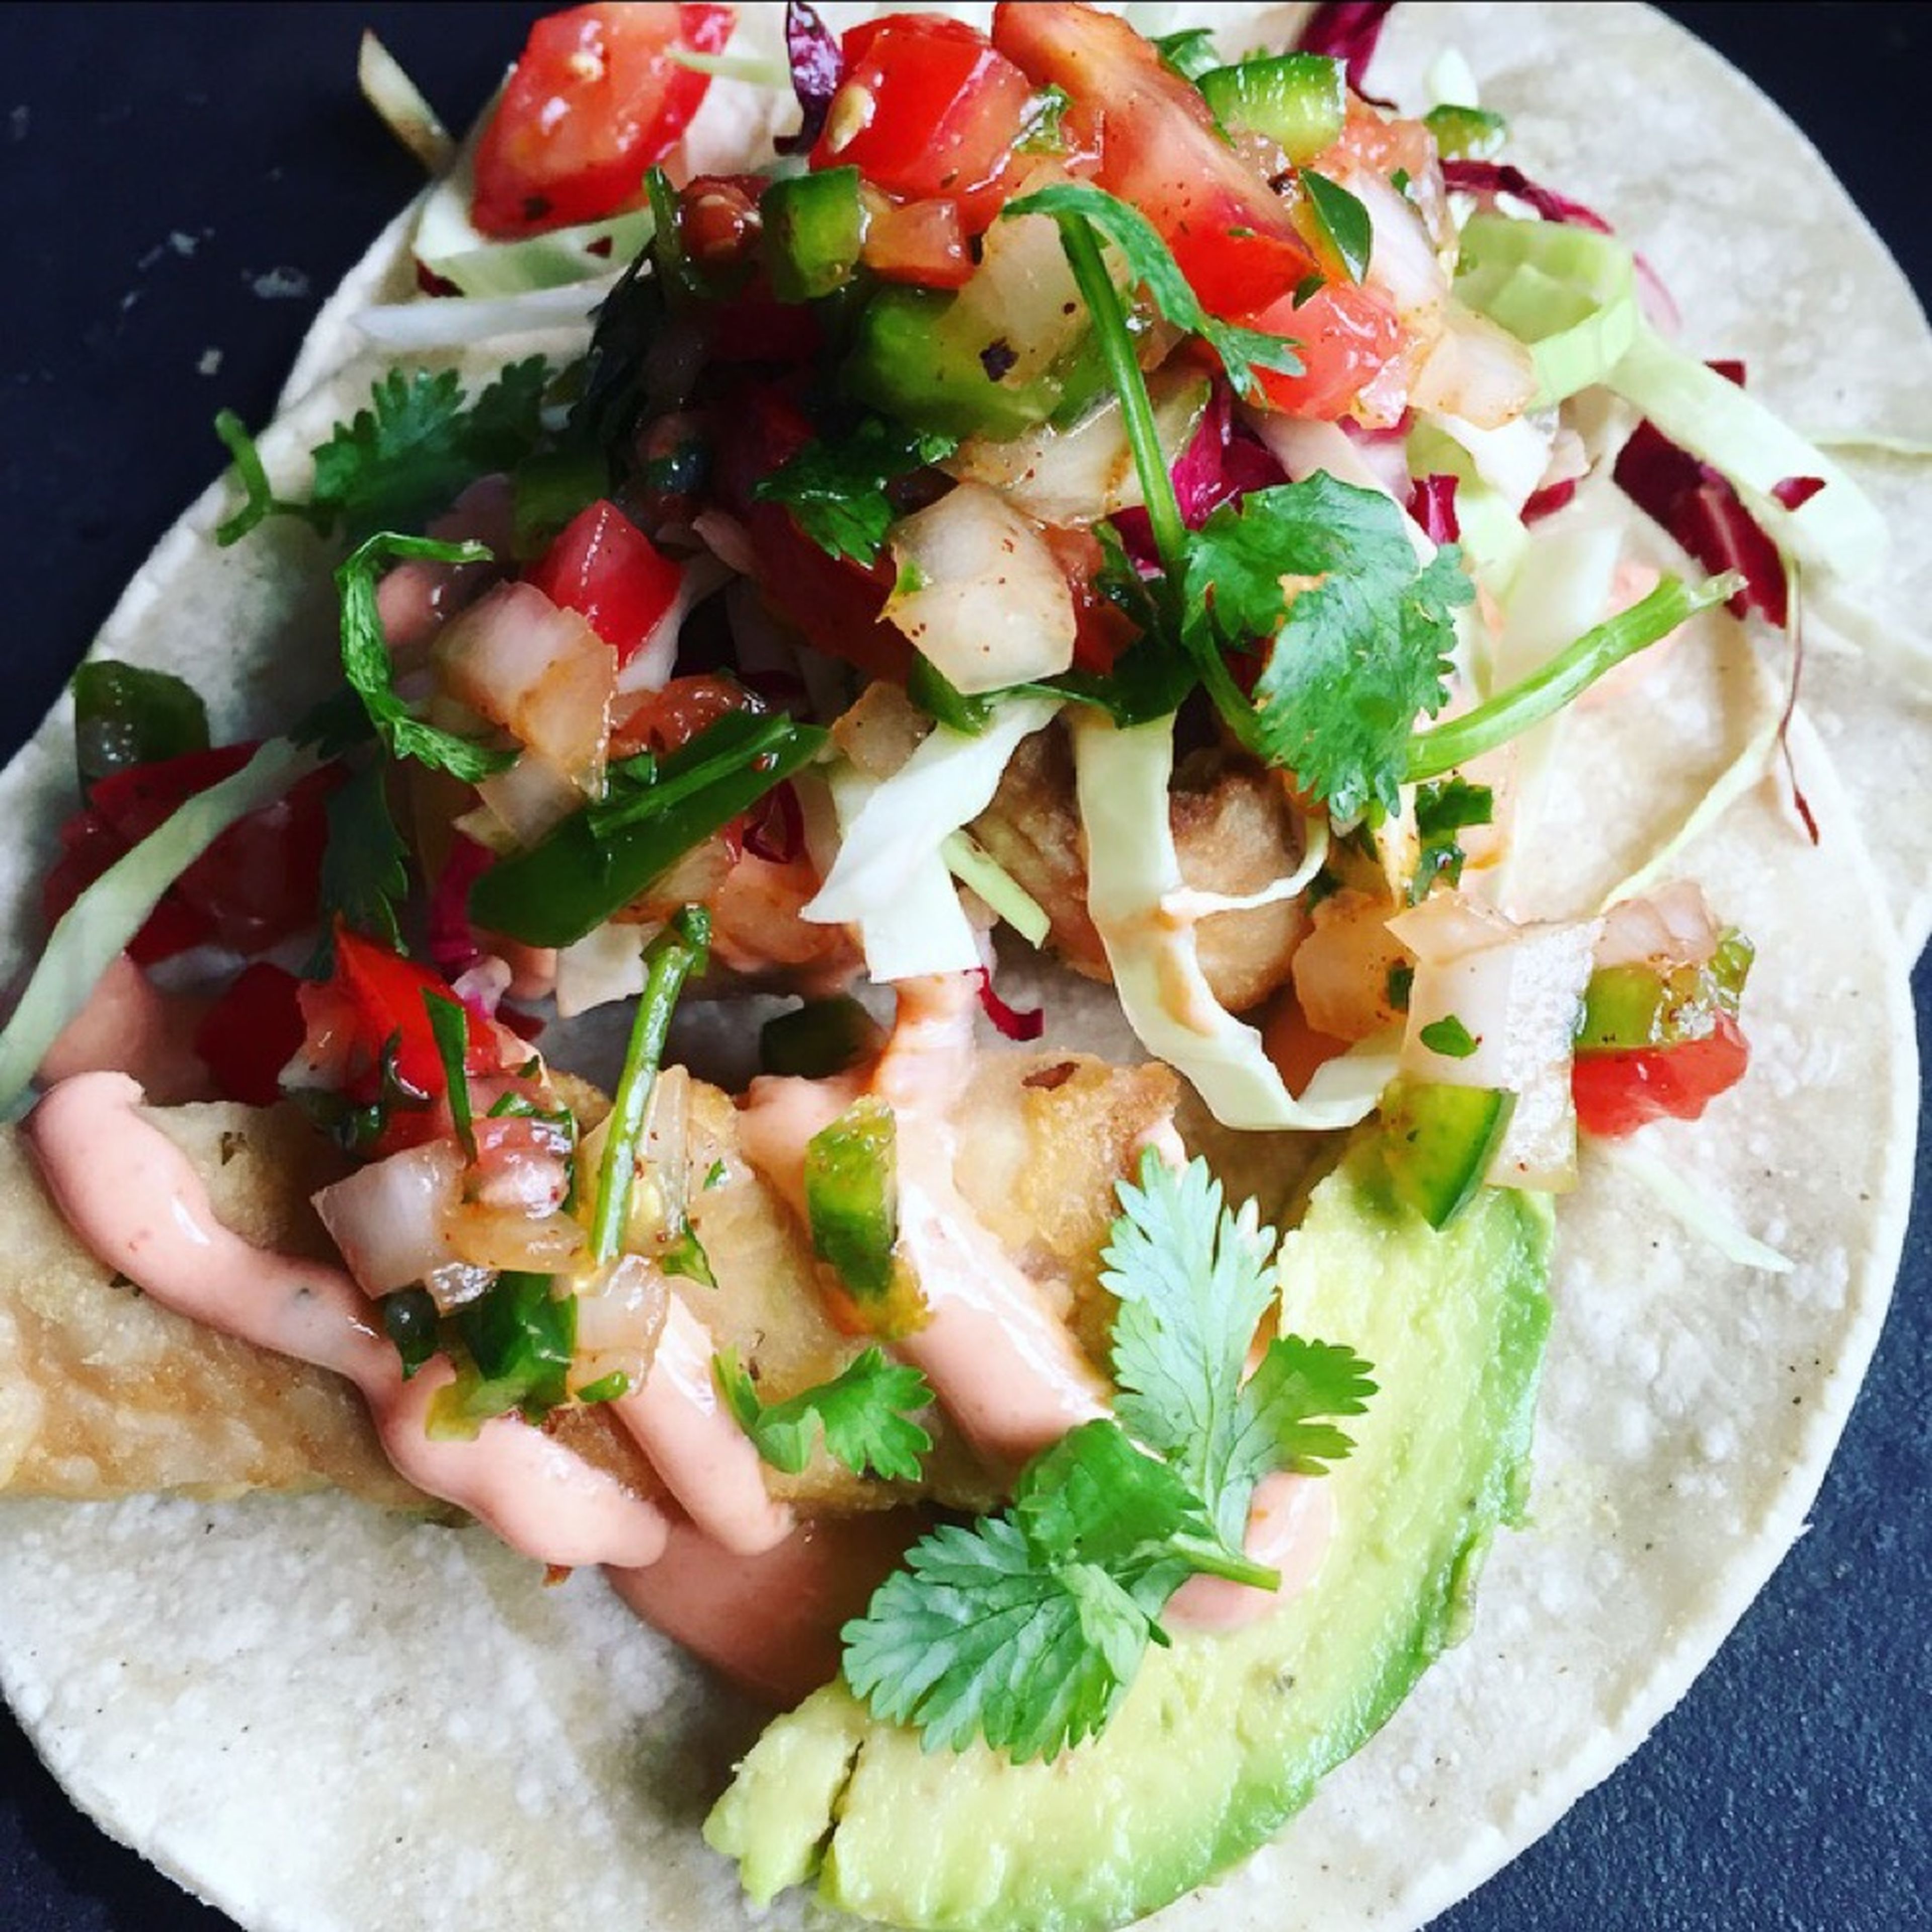 Warm corn tortillas in another frying pan. To assemble, lay 3 pieces of fish over the tortillas. Drizzle the Sriracha sauce over, then top with sliced avocado, salsa, shredded cabbage and radicchio, and some lime juice. Serve warm!